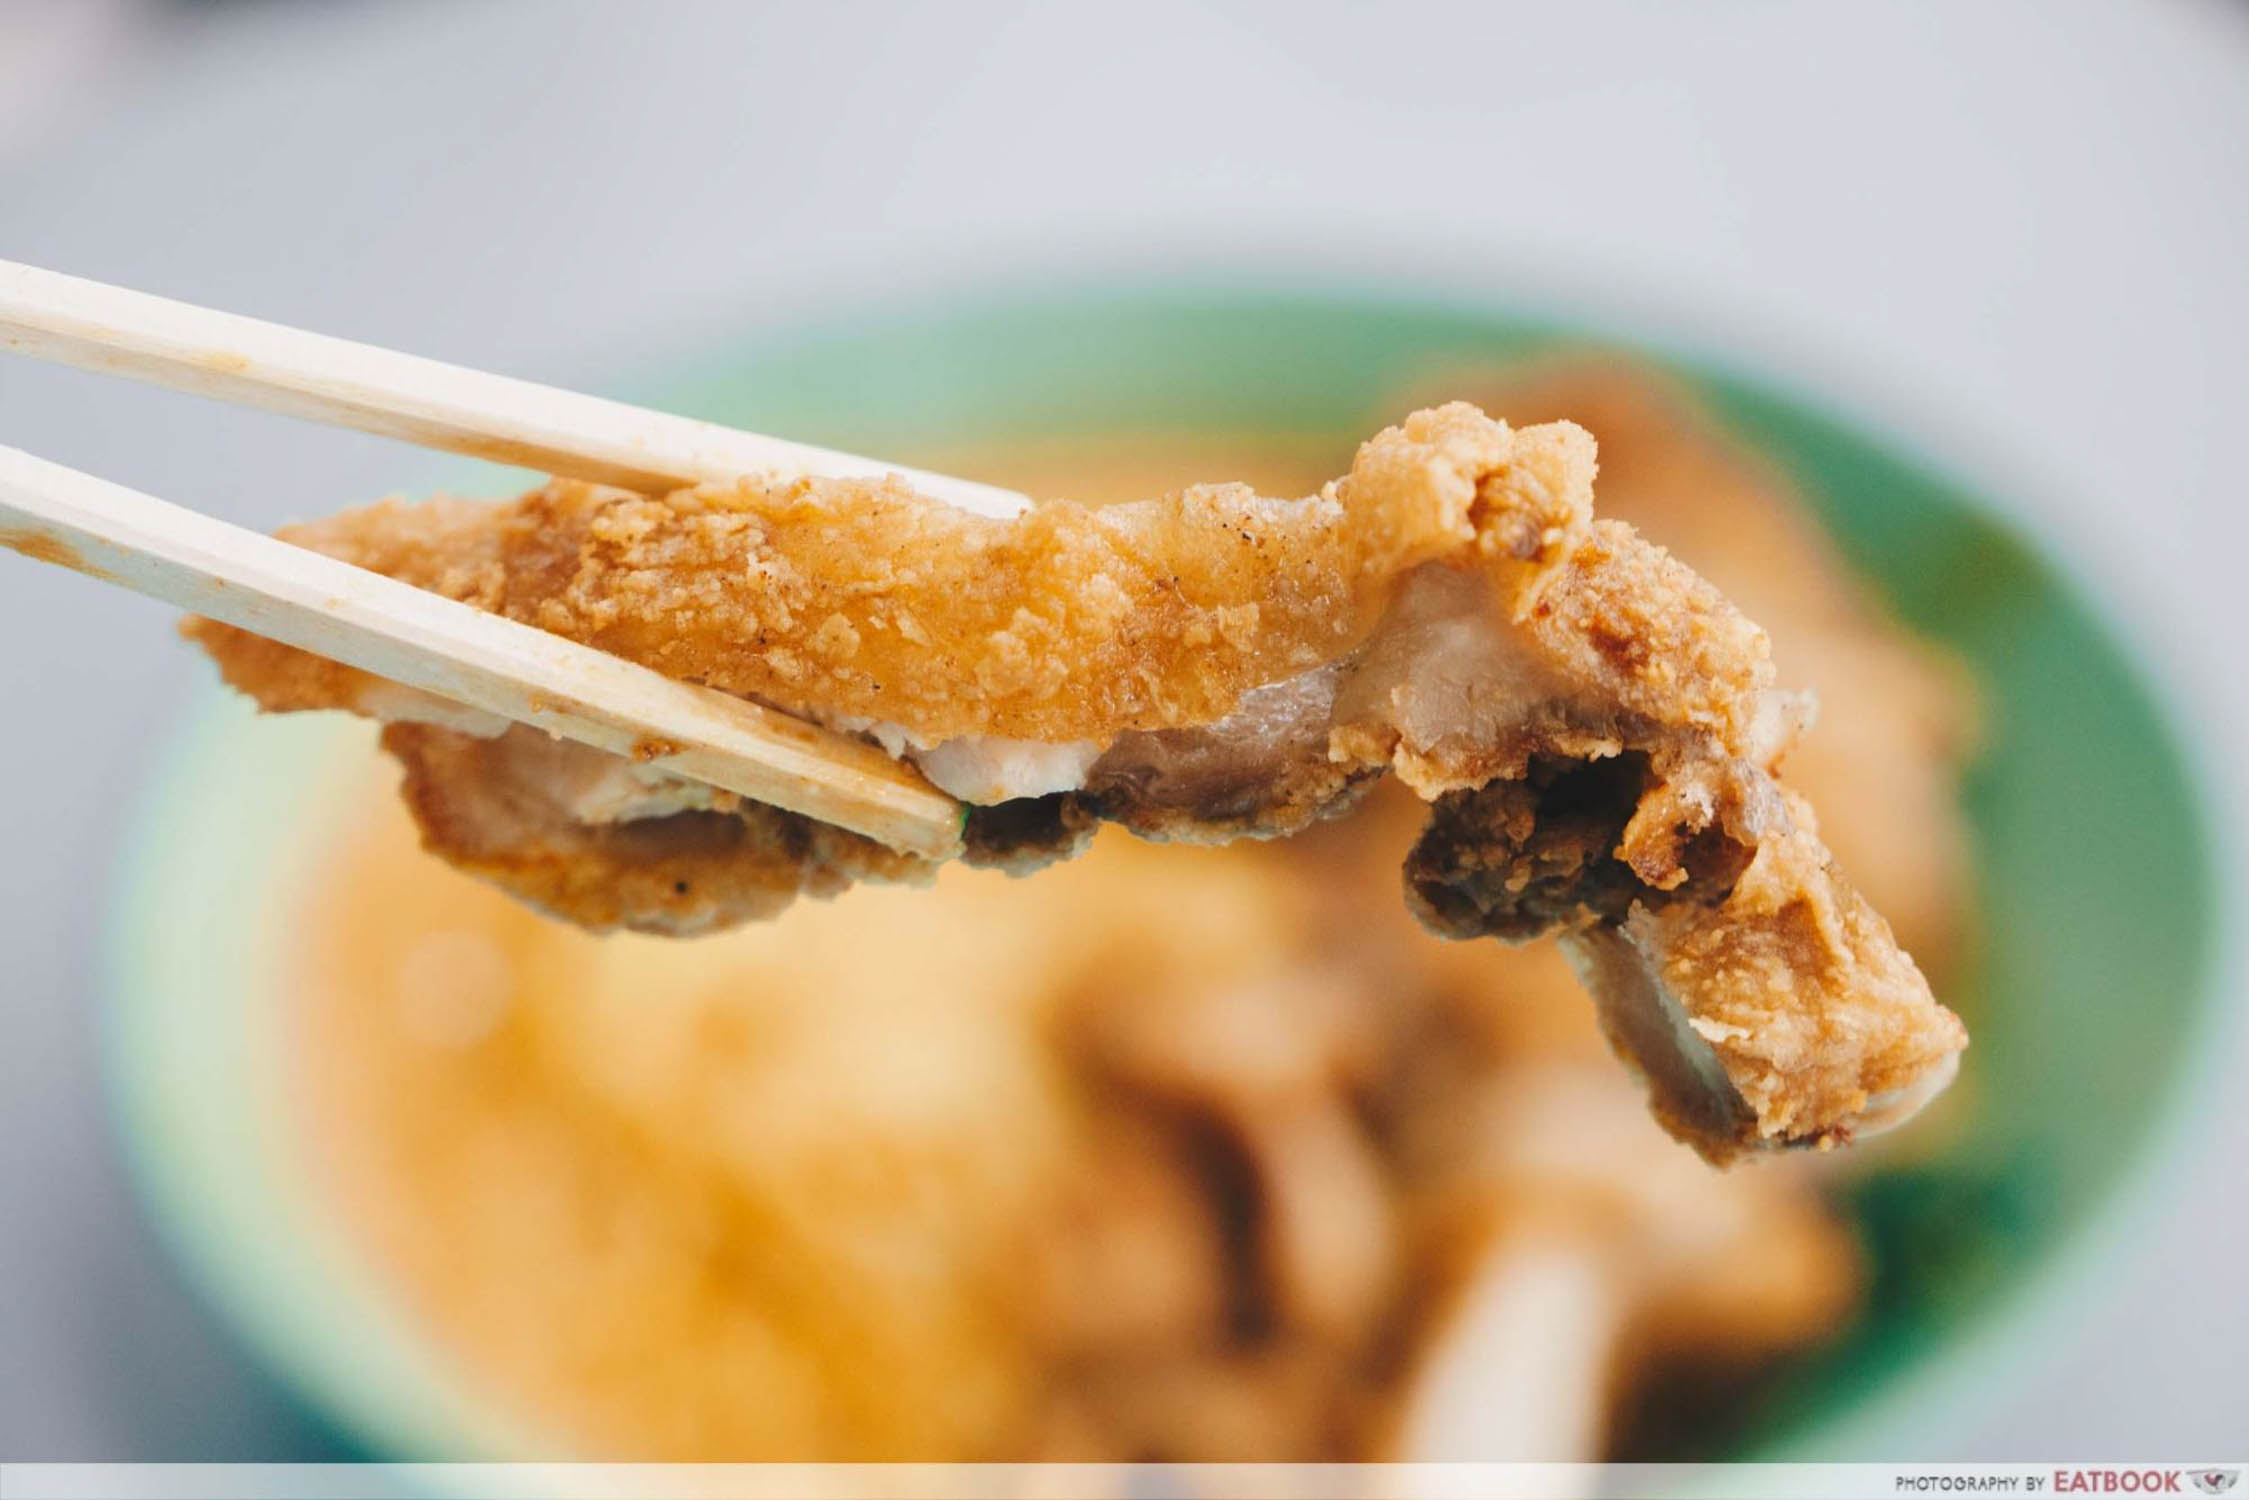 Cantonese Delights - Fried Chicken Cutlet Closeup